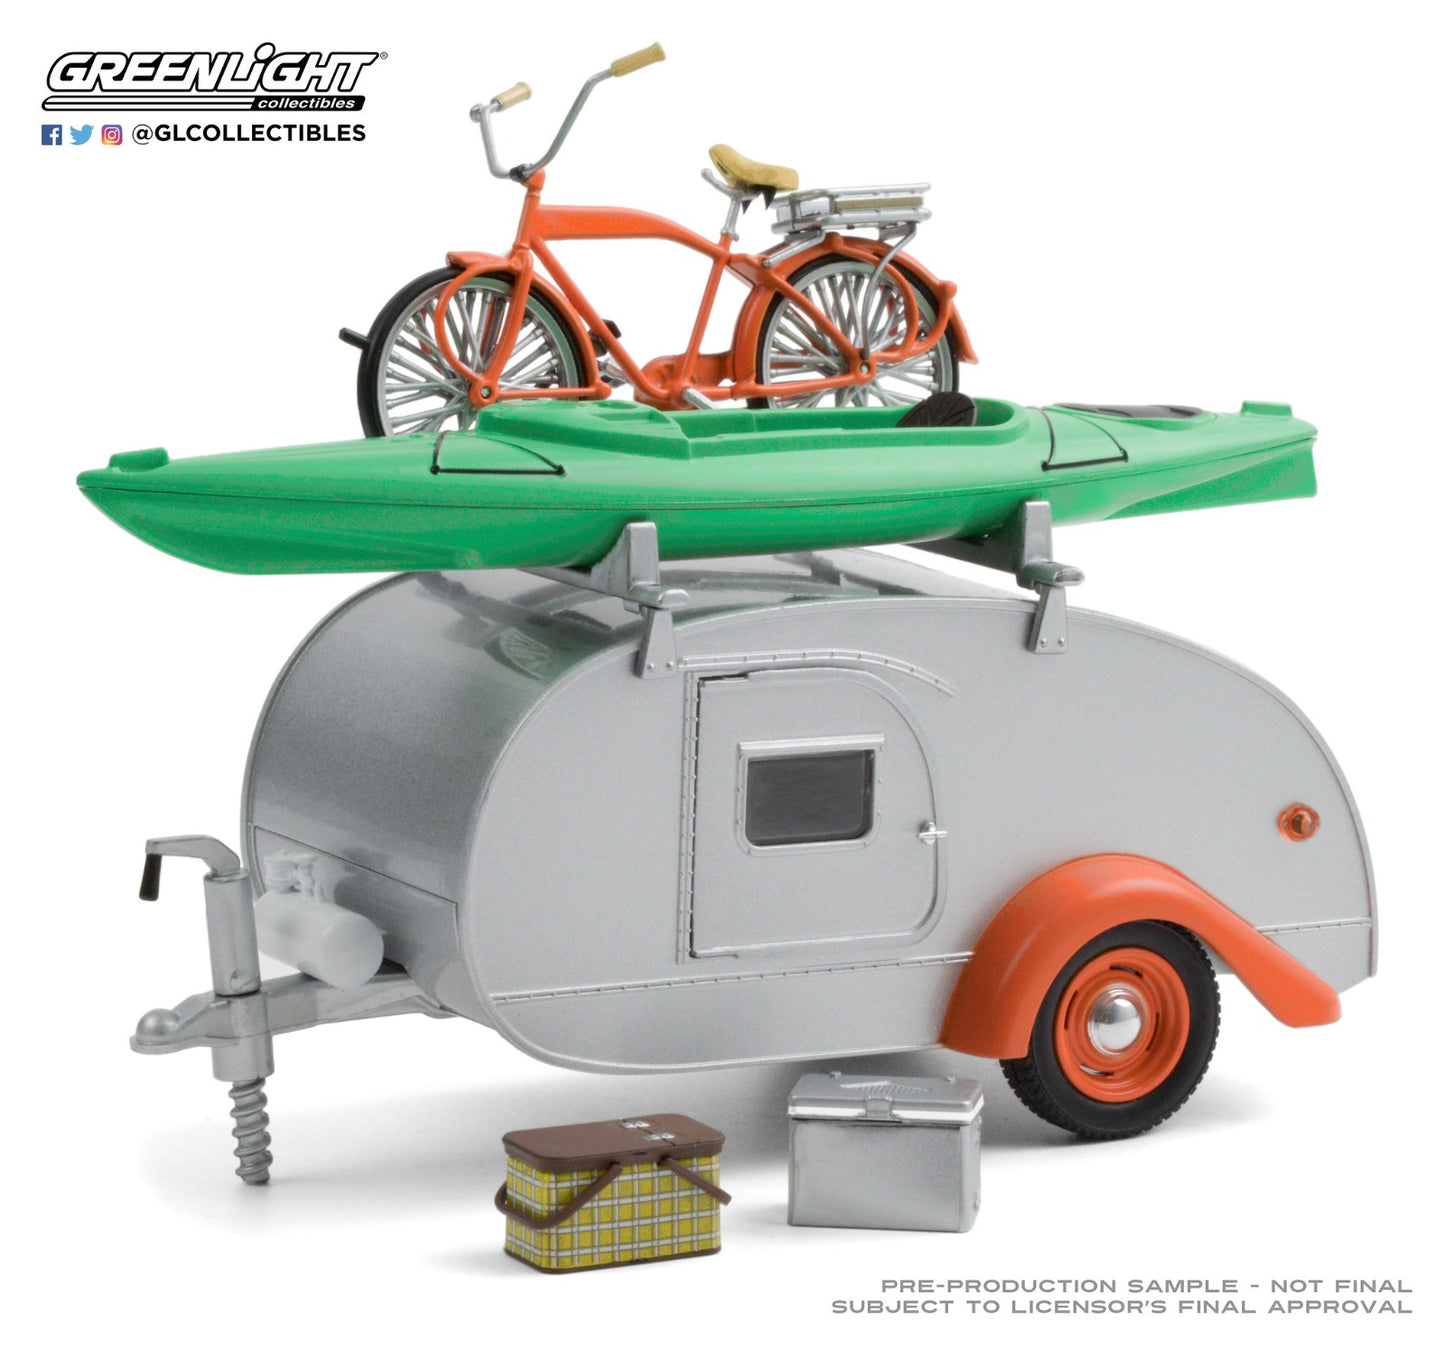 GreenLight 1:24 Hitch & Tow Trailers Series 6 - Teardrop Trailer in Silver with Orange Trim, Roof Rack, Bicycle, Kayak, Cooler and Picnic Basket 18460-B